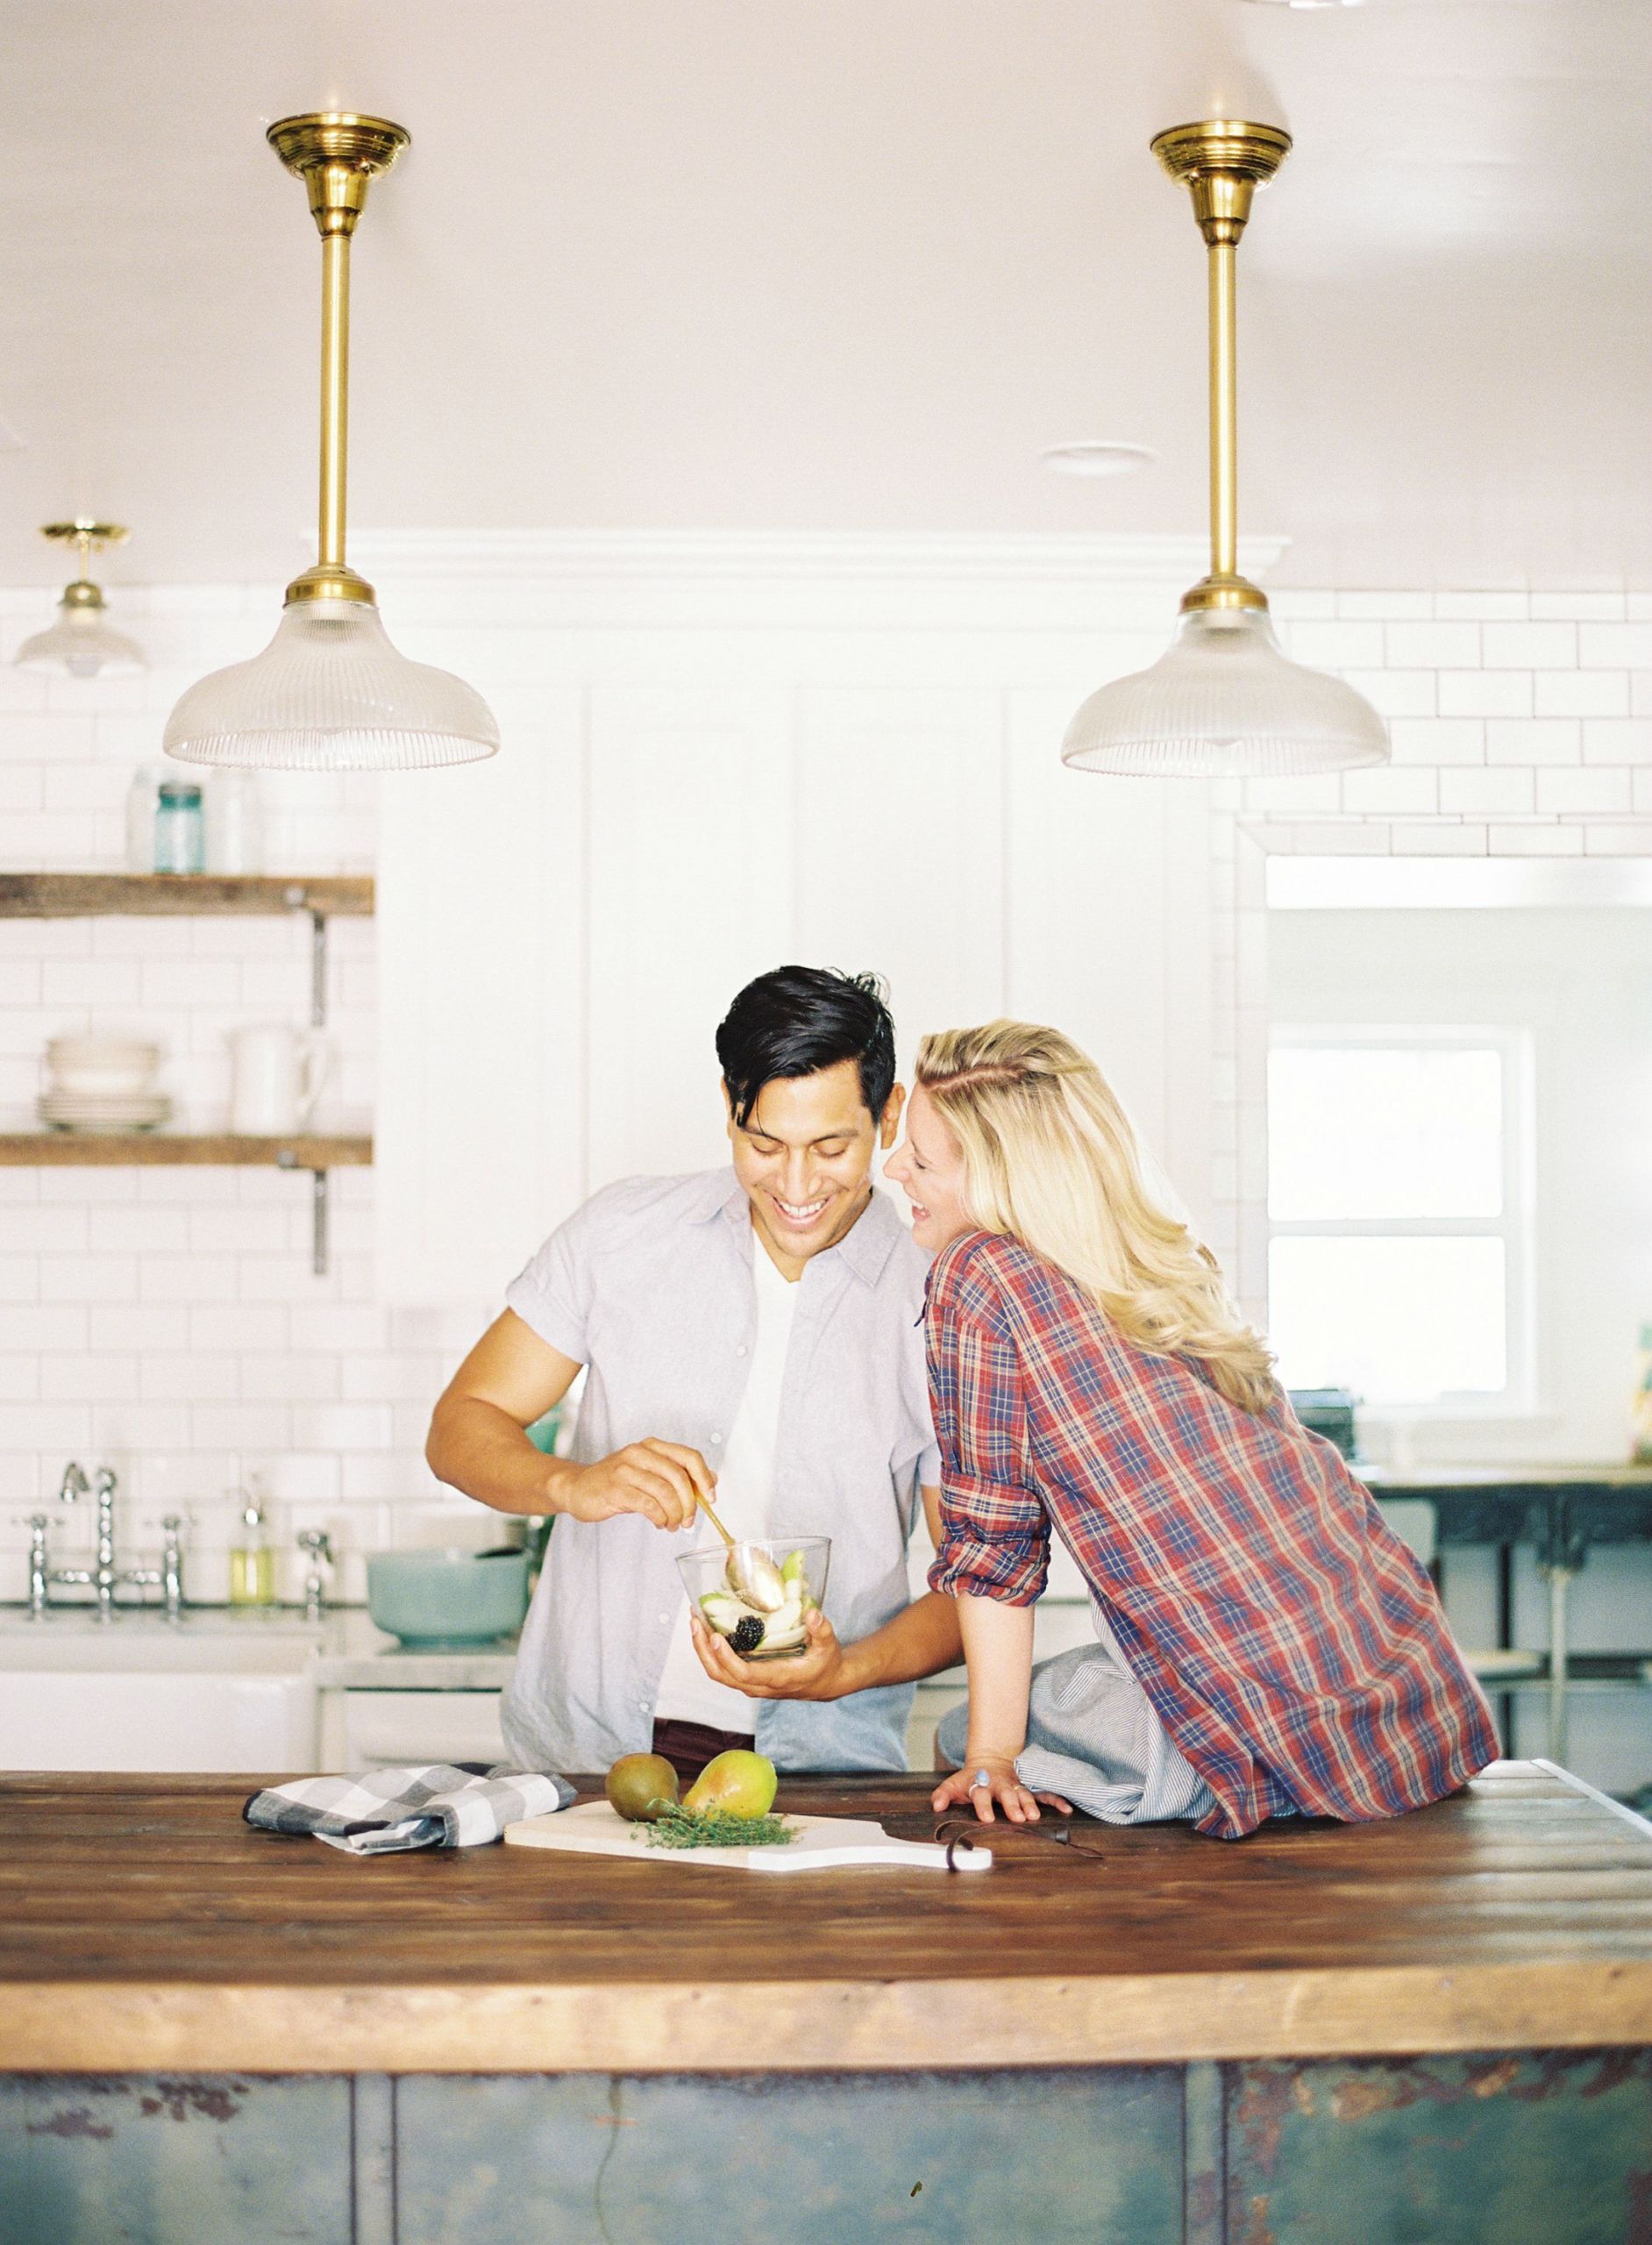 Wedding Gift Ideas For Couple Already Living Together
 Kitchen Engagement Shoot